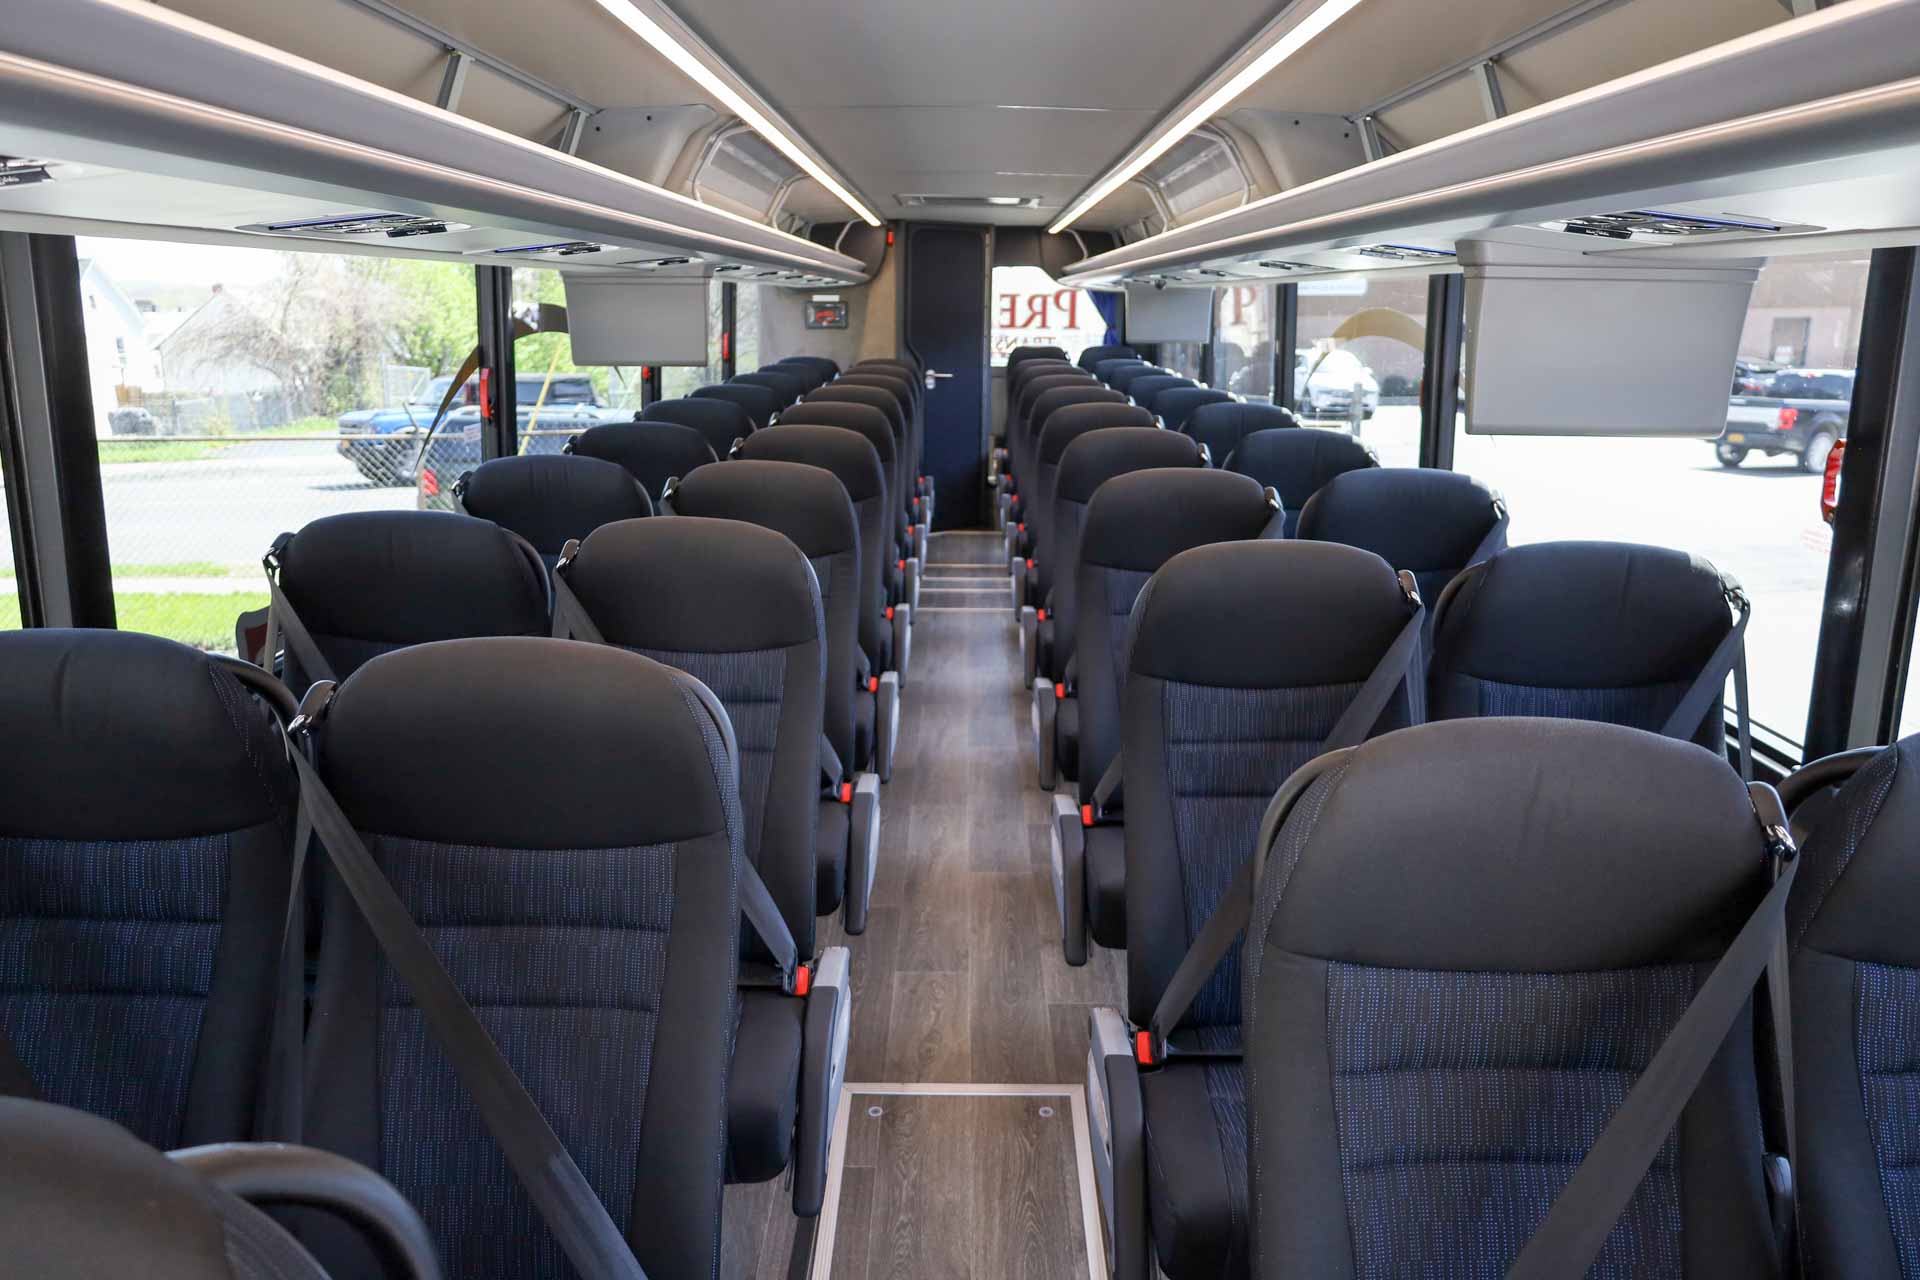 Charter Coach Bus interior seating